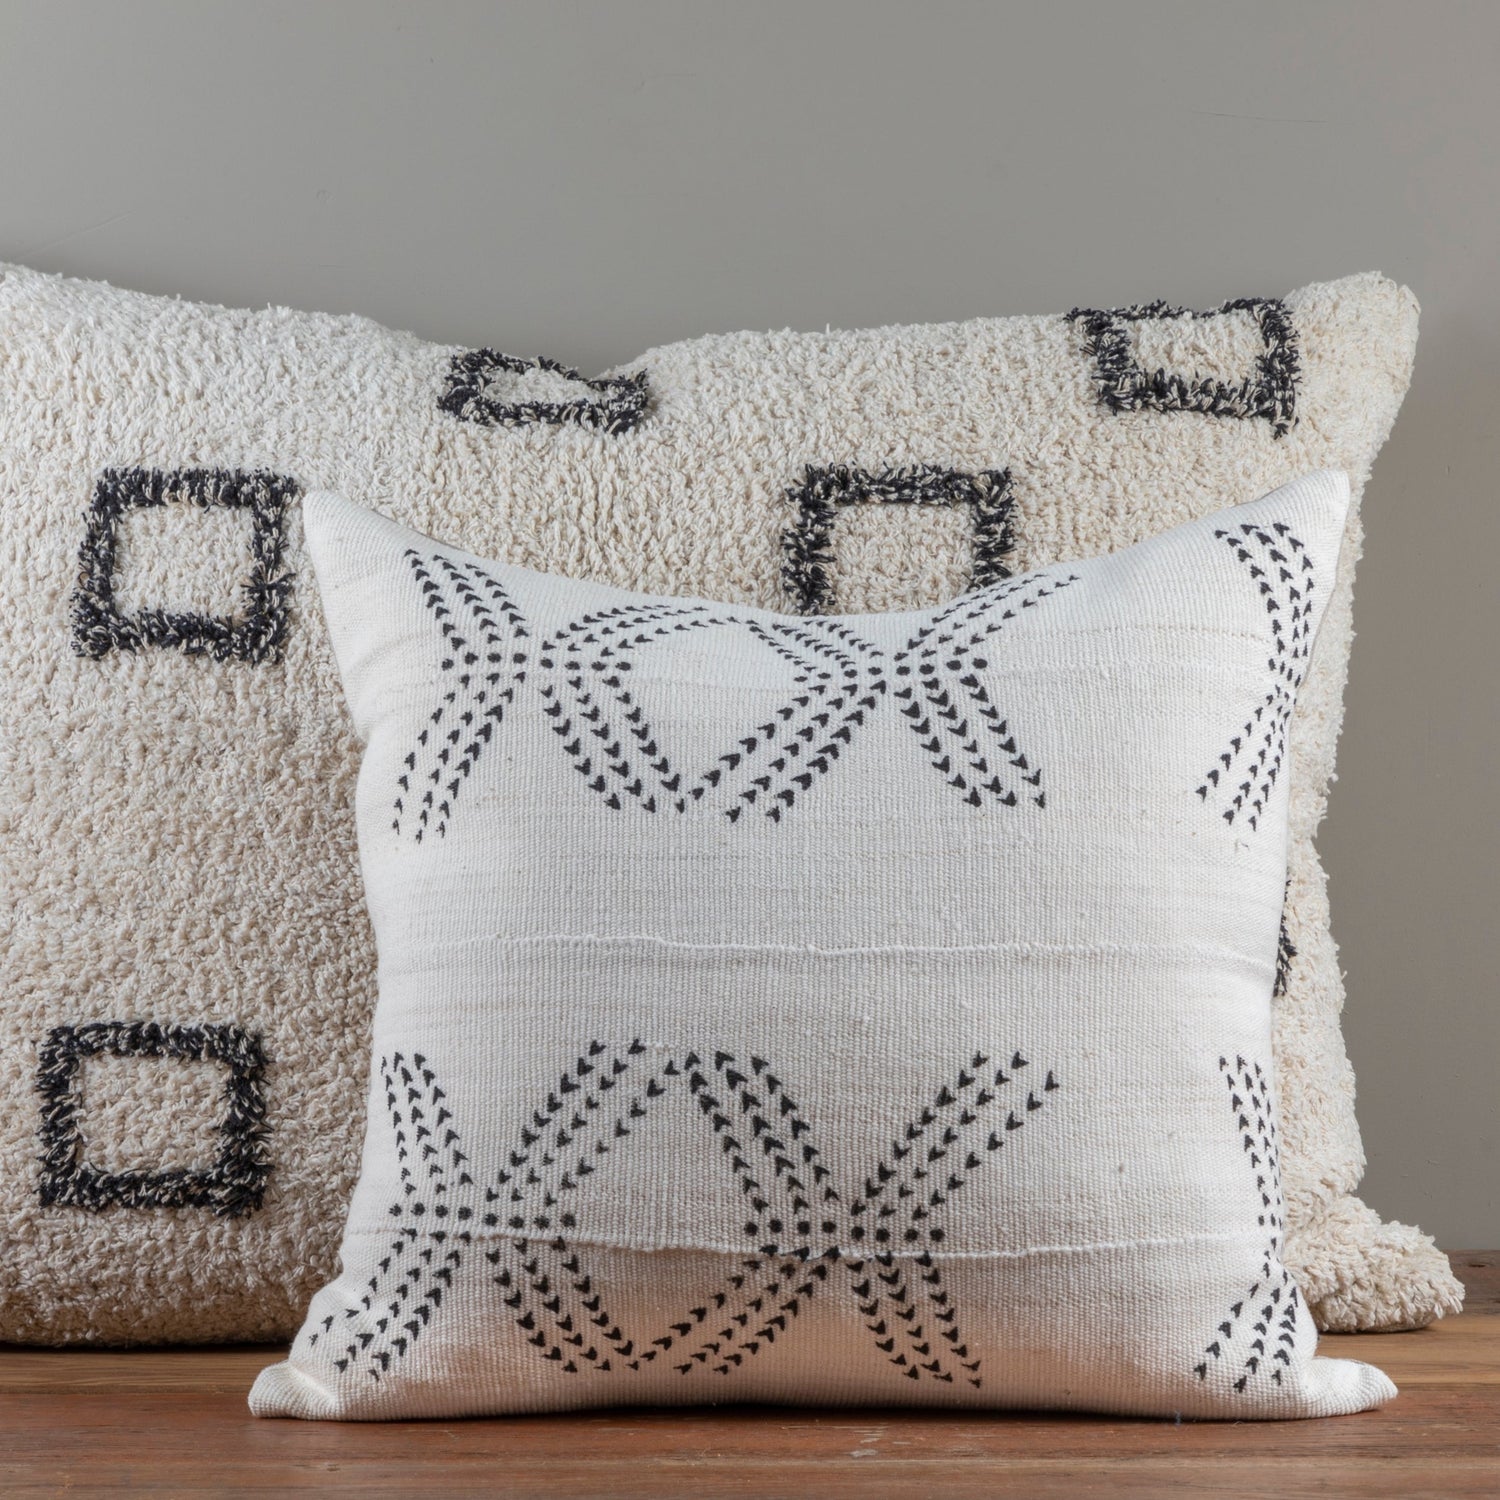 Mud Cloth Square Pillow, White with Tracks